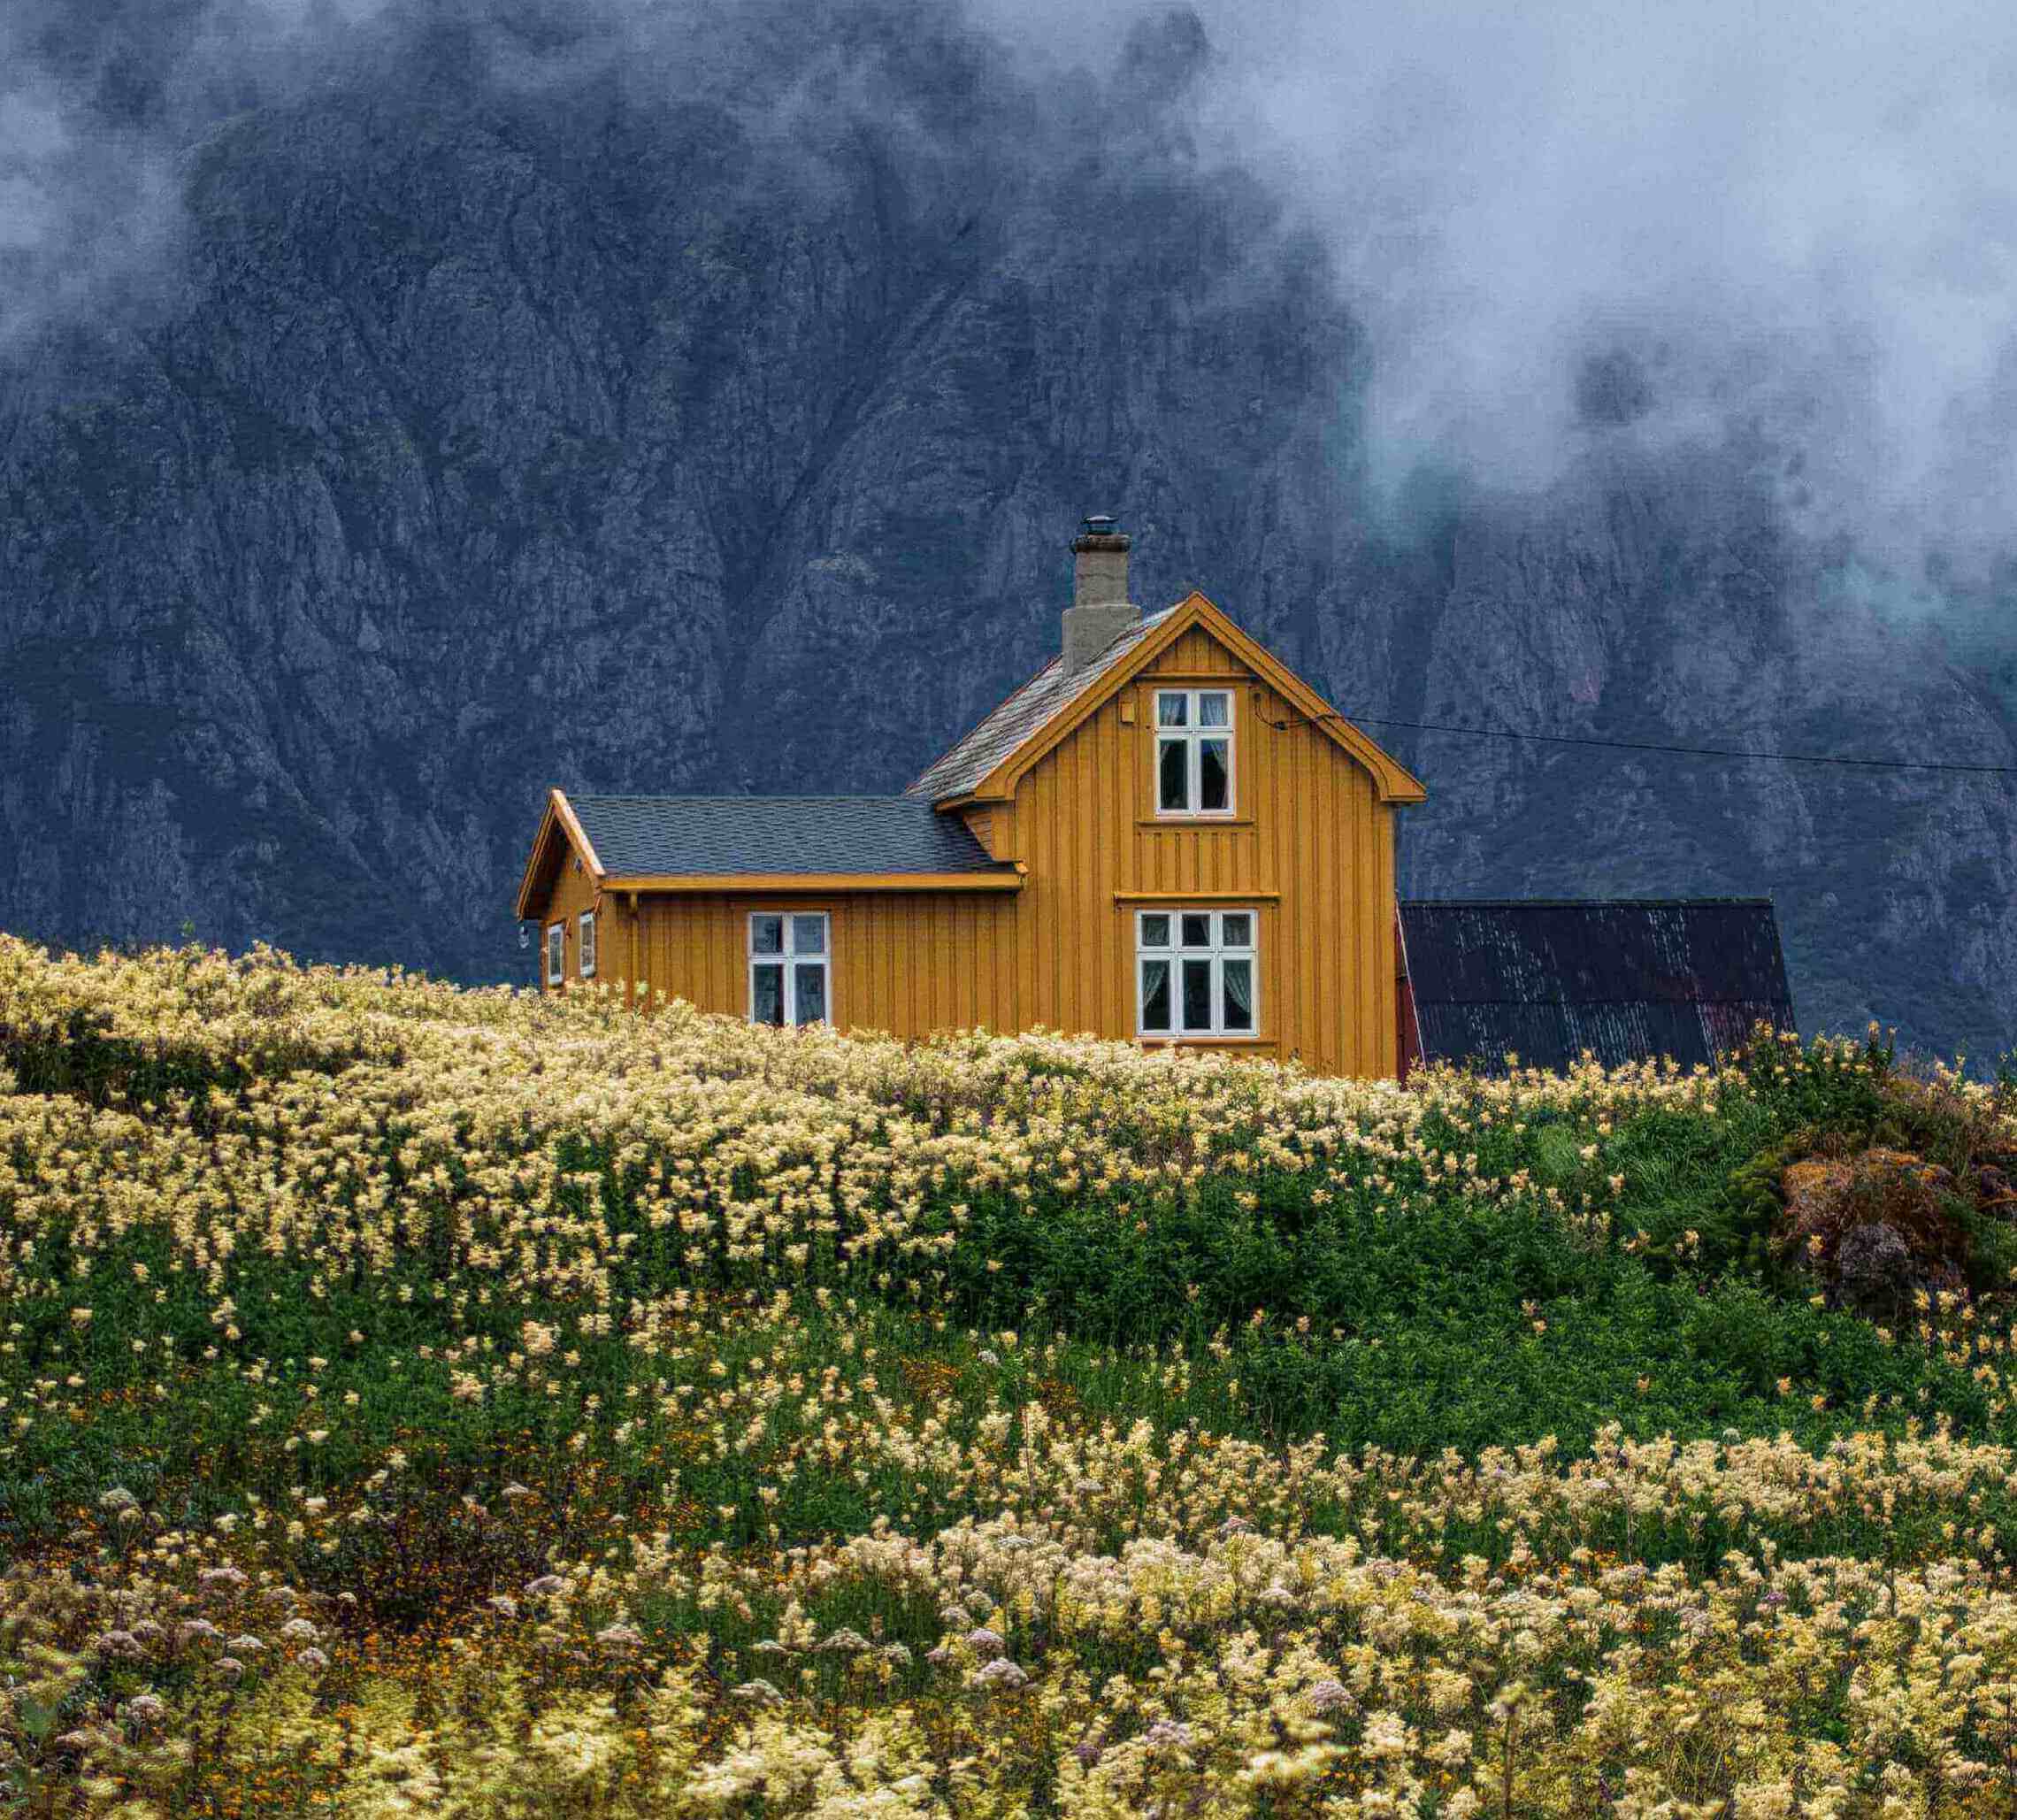 A yellow house in the mountains. - Cottagecore